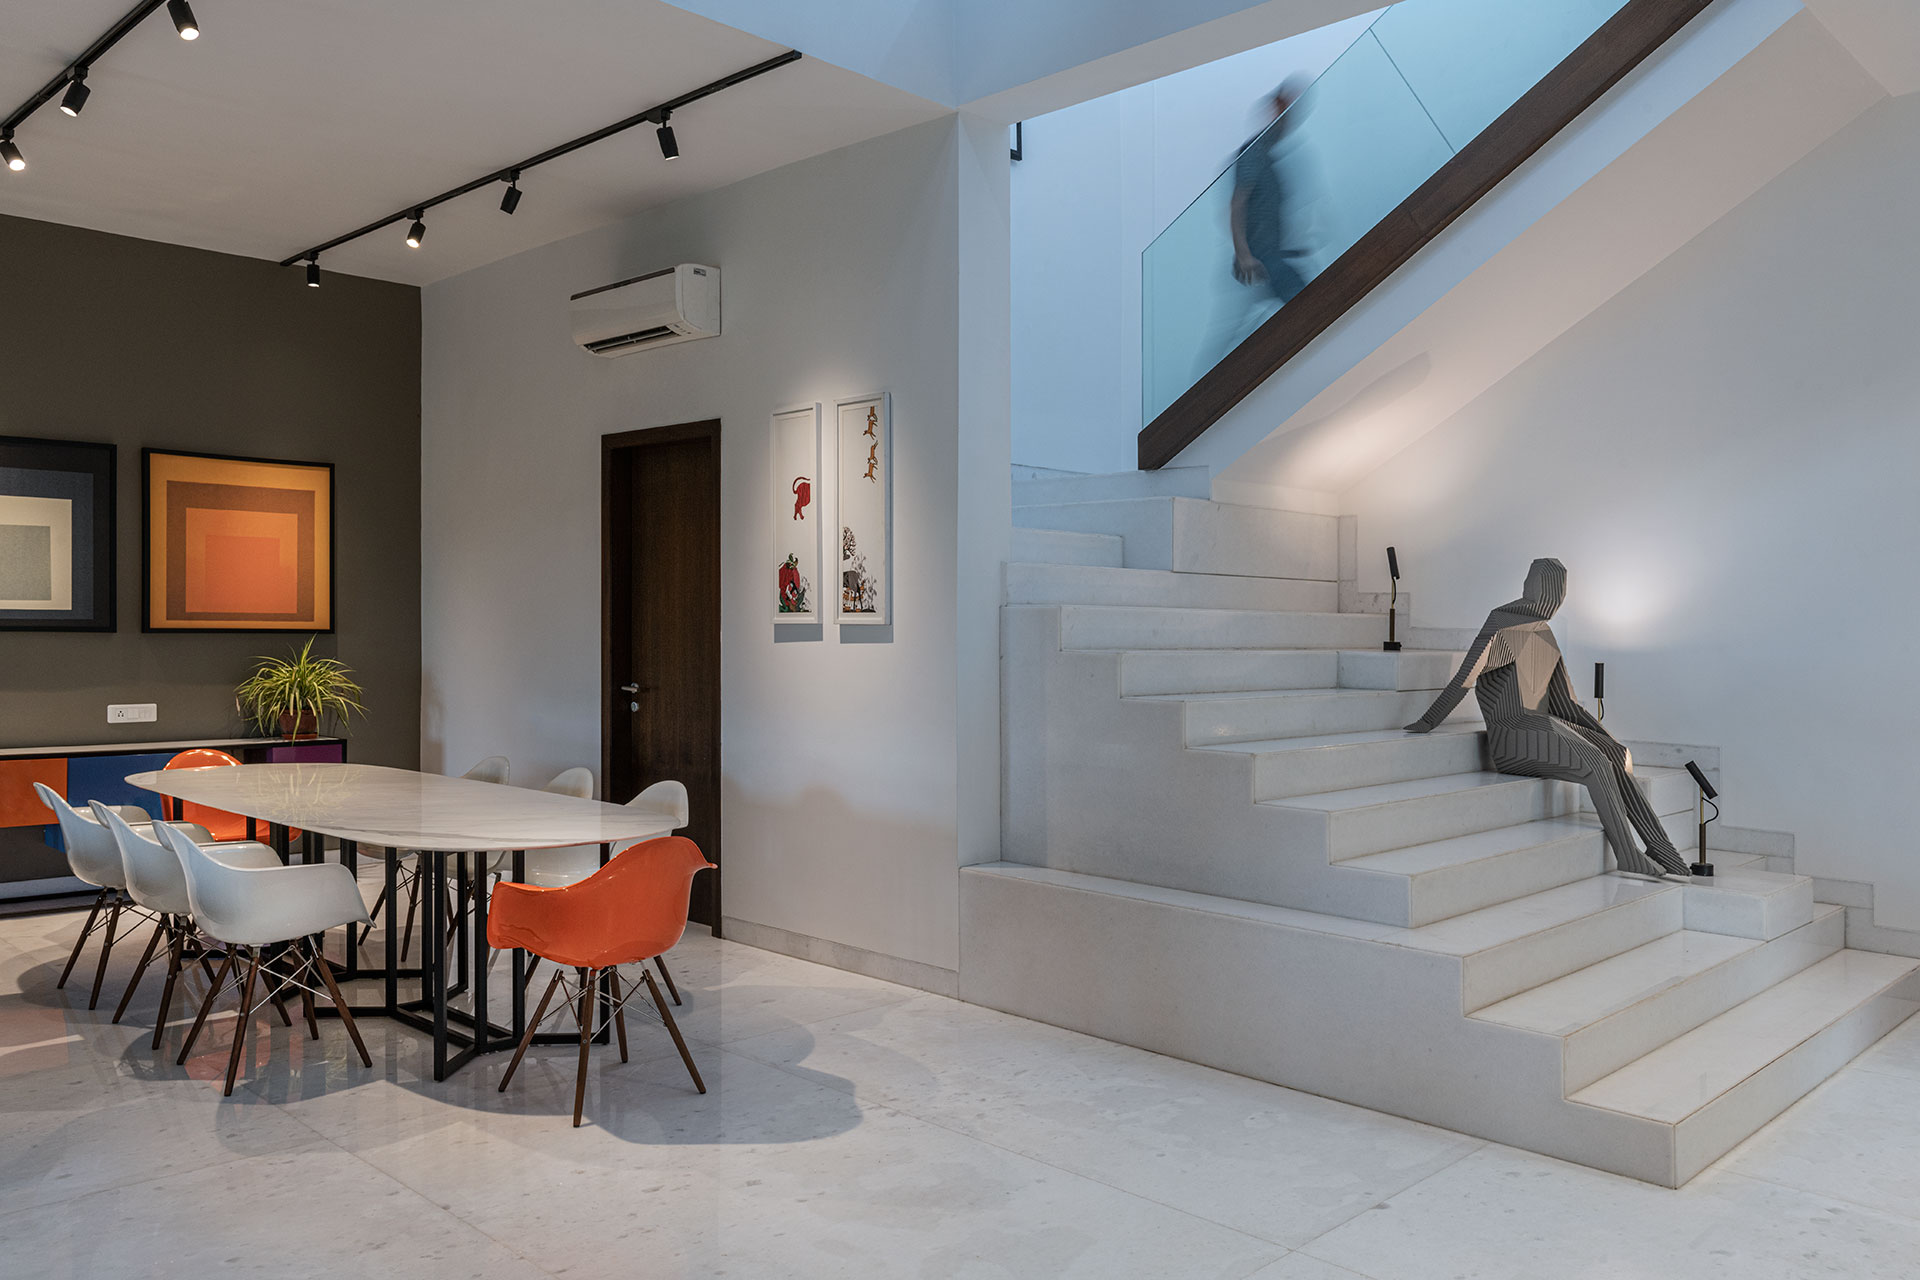 Monolithic white marble flooring turns and folds over the extended staircase treads and risers with a custom made faceted ‘human’ art installation created for this space.  The relaxed vibe exuded by the form of the cascading staircase is embodied by the ‘contemplating’ sitting human like sculpture.